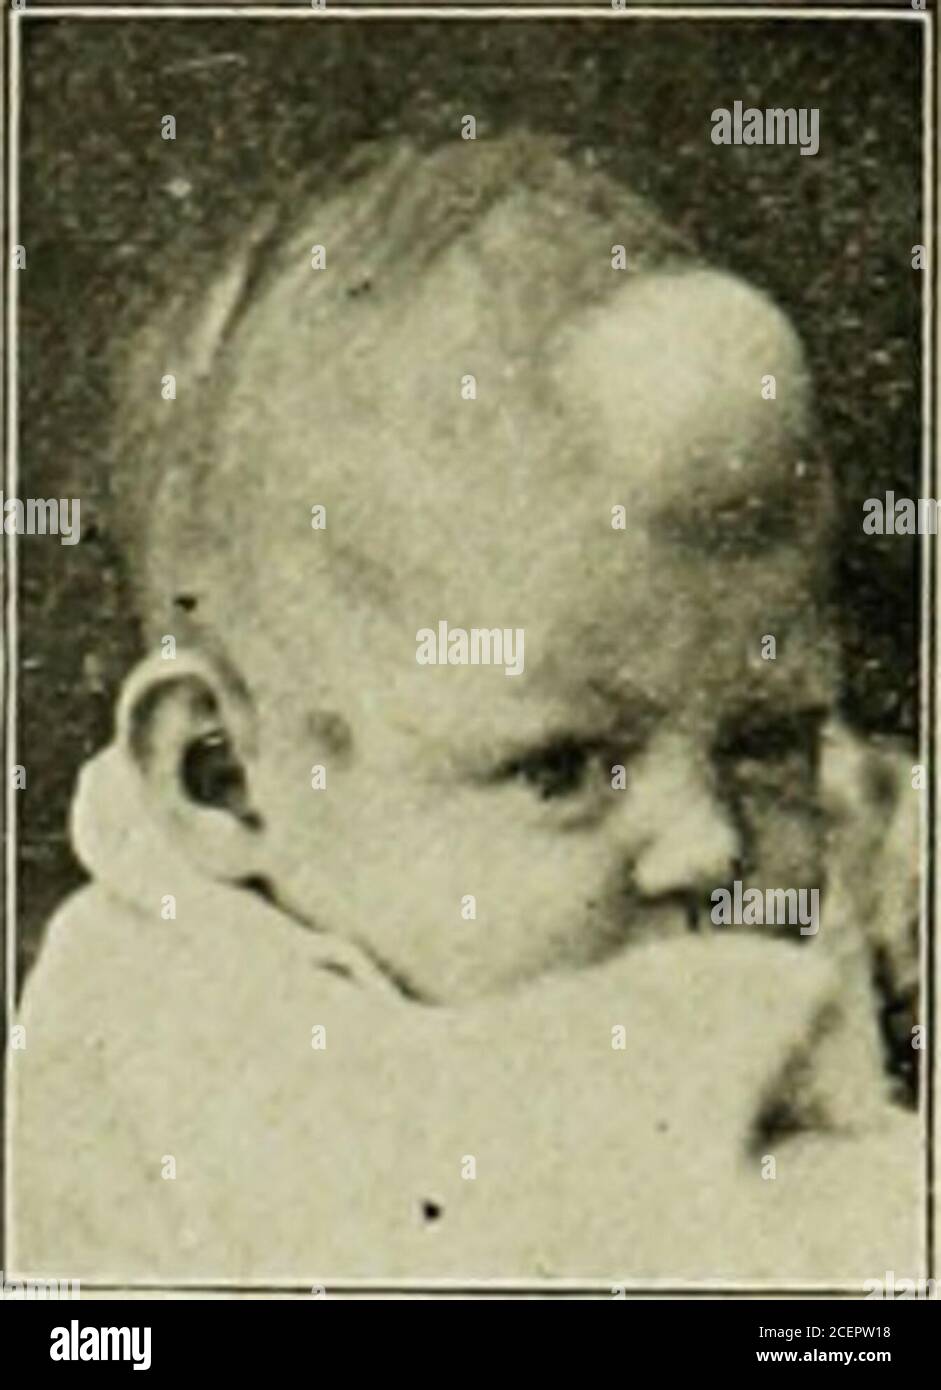 . The diseases of infancy and childhood. Fig. 90.—Meningocele. Infant oneMonth old. MALFORMATIONS 721. Fig. 91.— Frontal Meningocele. Infant Three Months Old. tion of fluid, which communicates by a small opening with the generalarachnoid cavity of the brain. Of 105 cases collected by Schatz, 59 occupied the occipital regionand 46 were frontal. The aperture through which the occipital pro-trusion takes place is usually in the median line. It may communicatewith the posterior fontanel, with the foramen mag-num, or with the cleft of a spina bifida. The occip-ital bone may be divided in the median Stock Photo